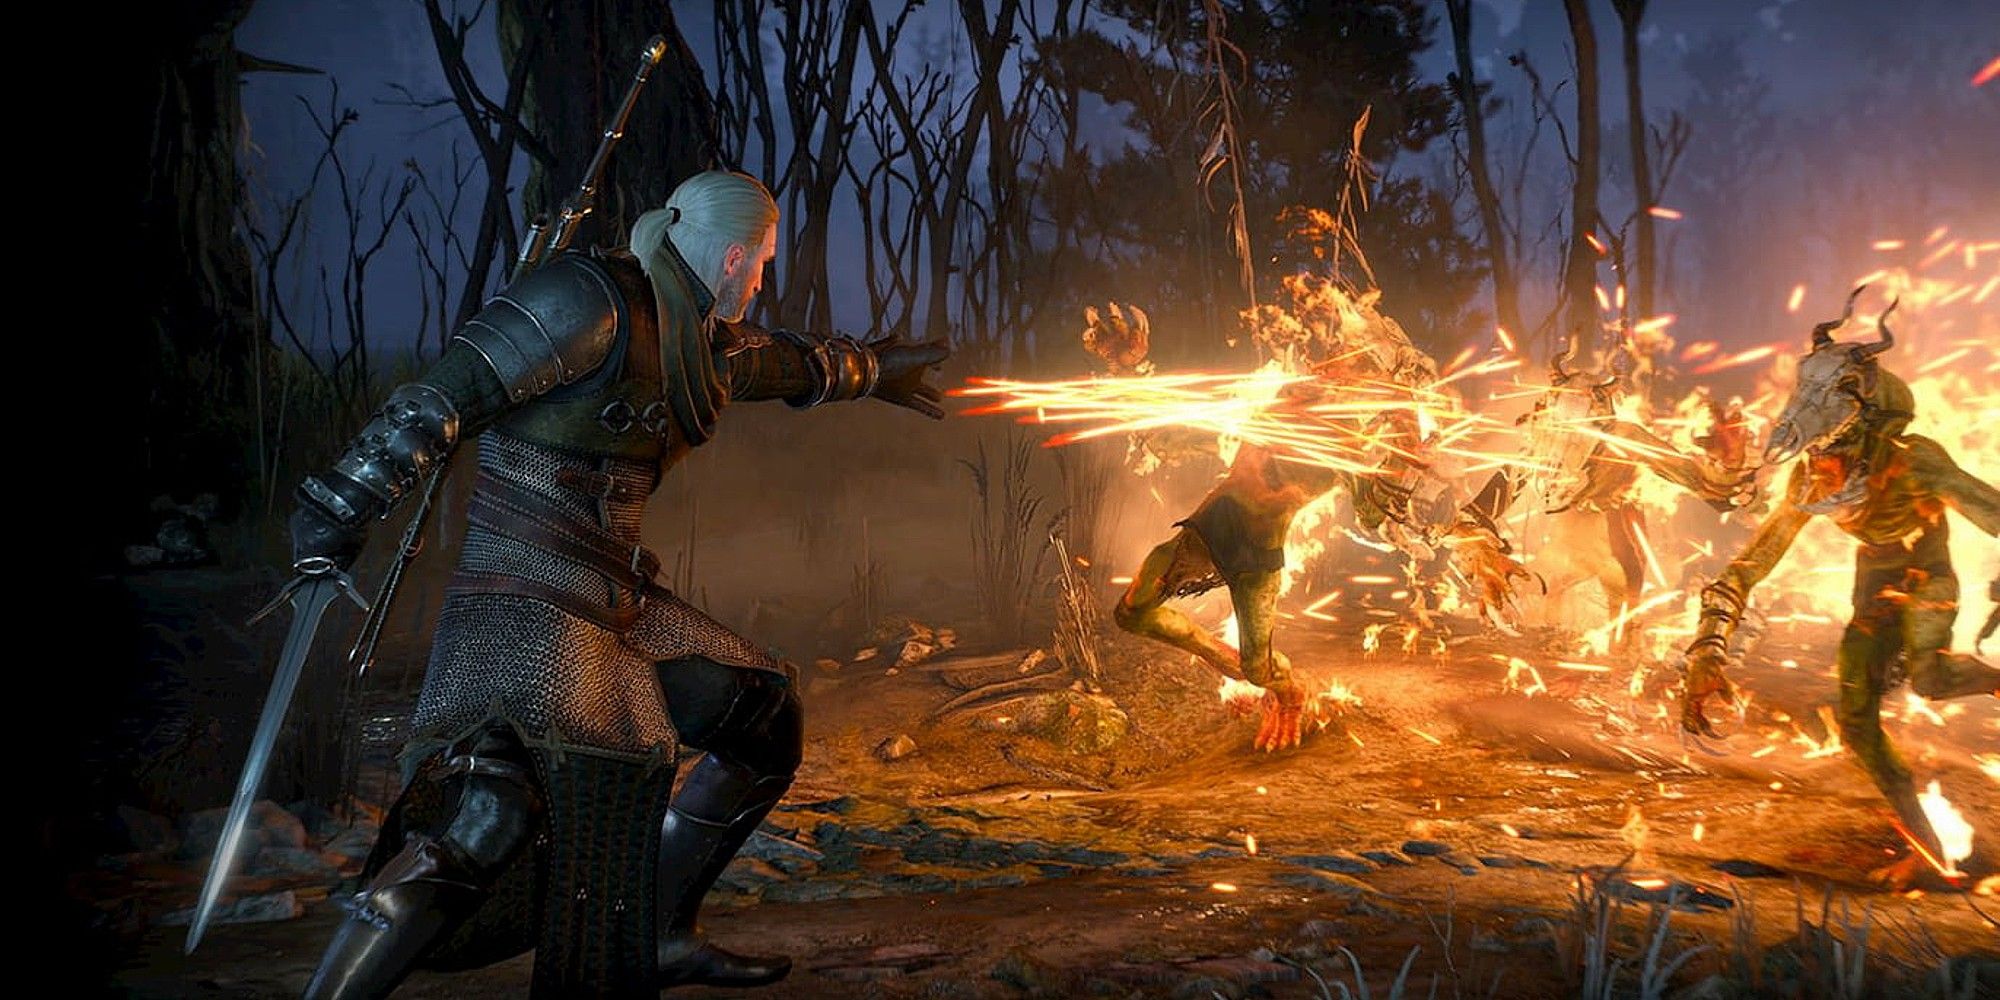 The Witcher 3 PS5 And Xbox Series X Upgrades Rated By PEGI